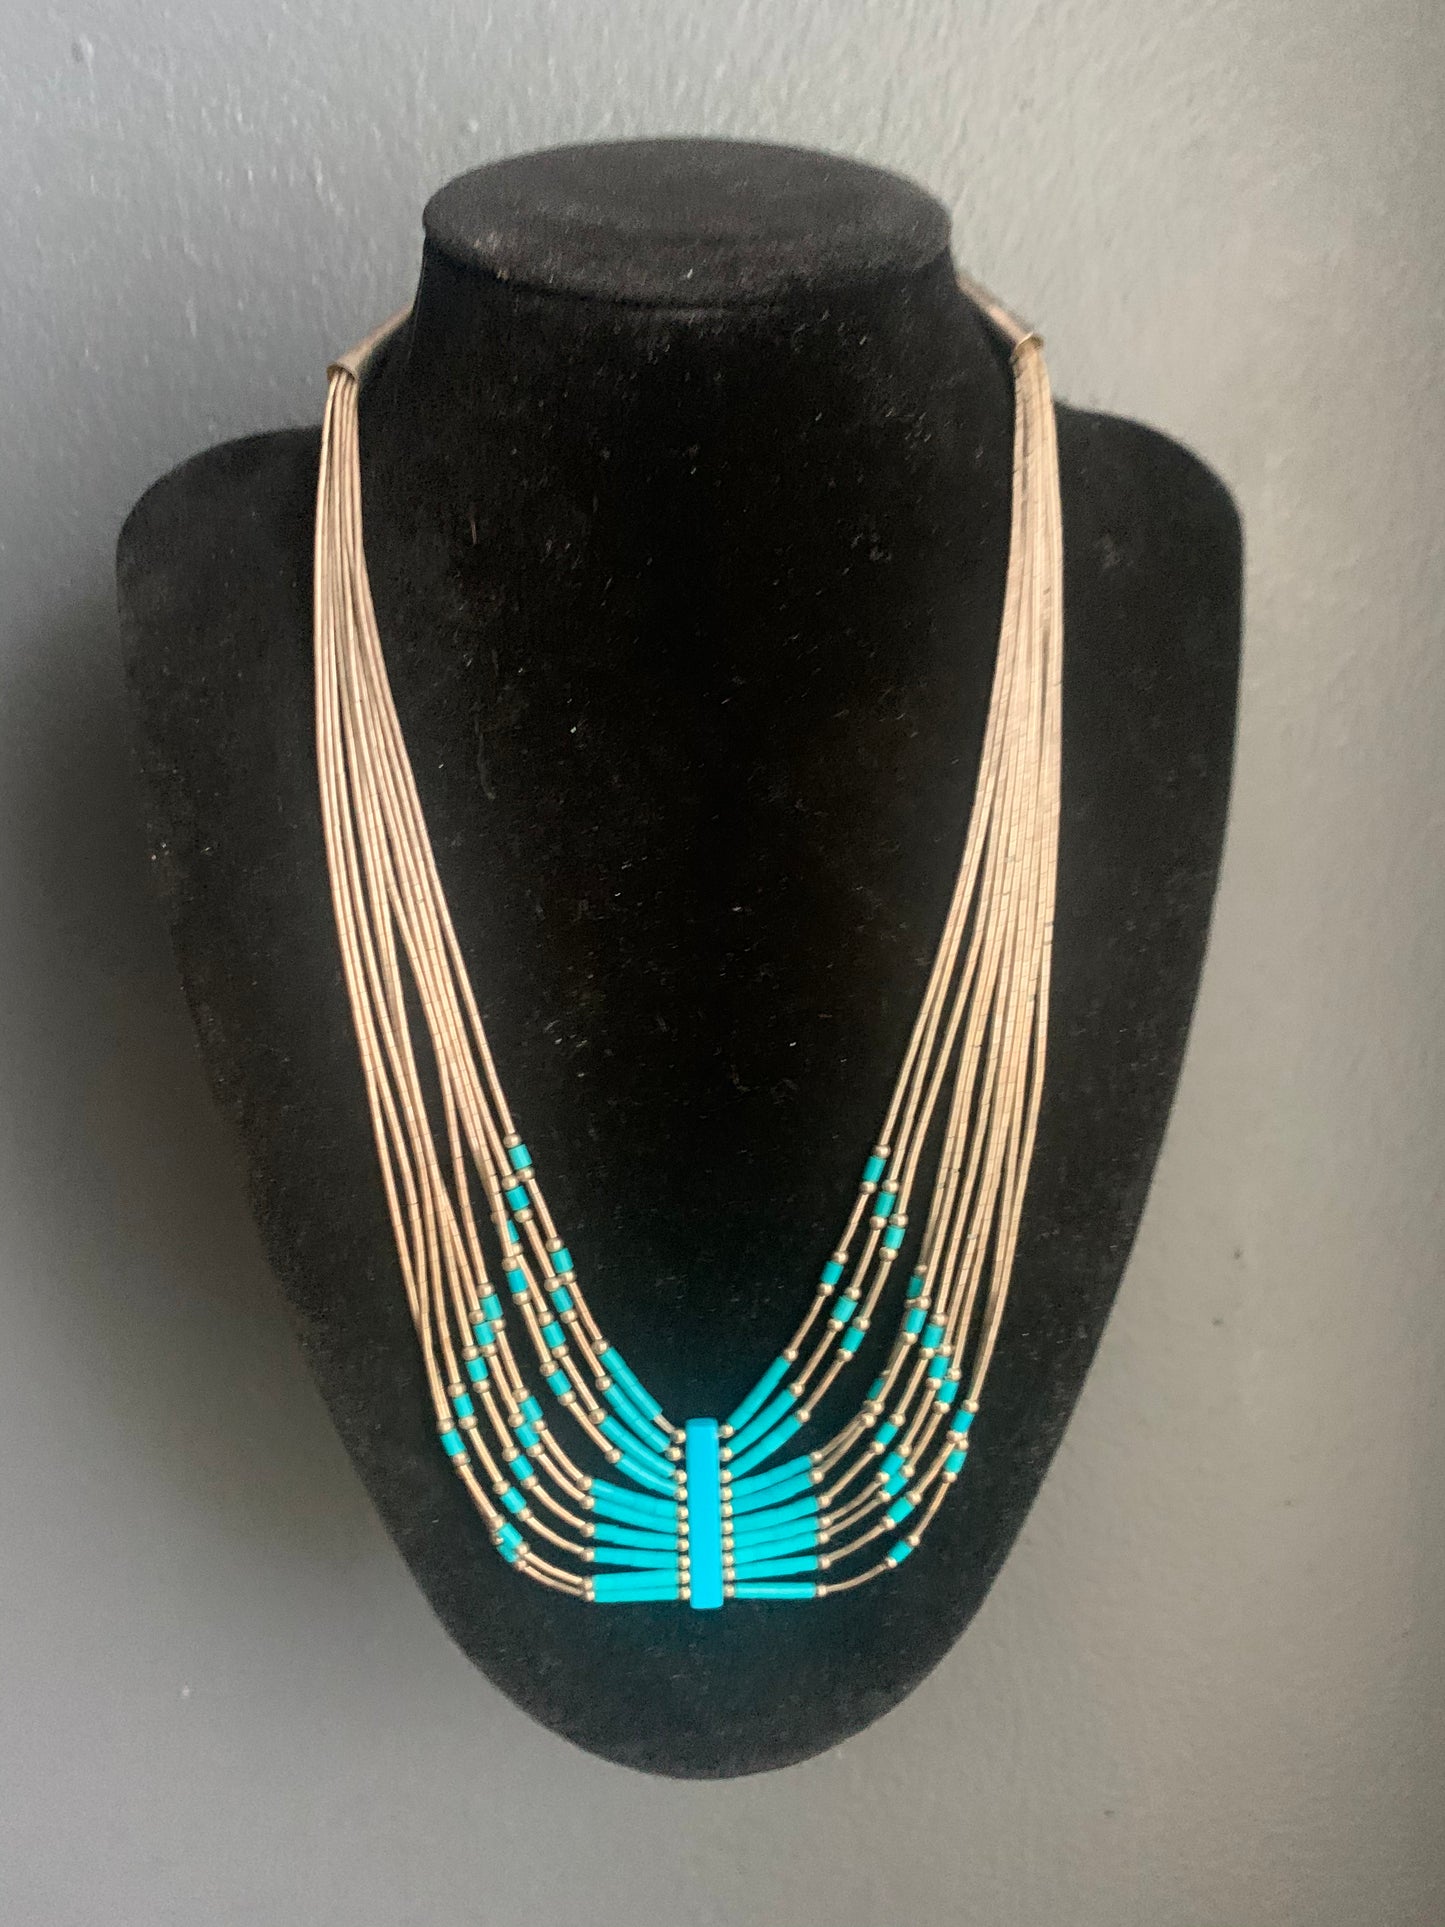 A turquoise and silver necklace